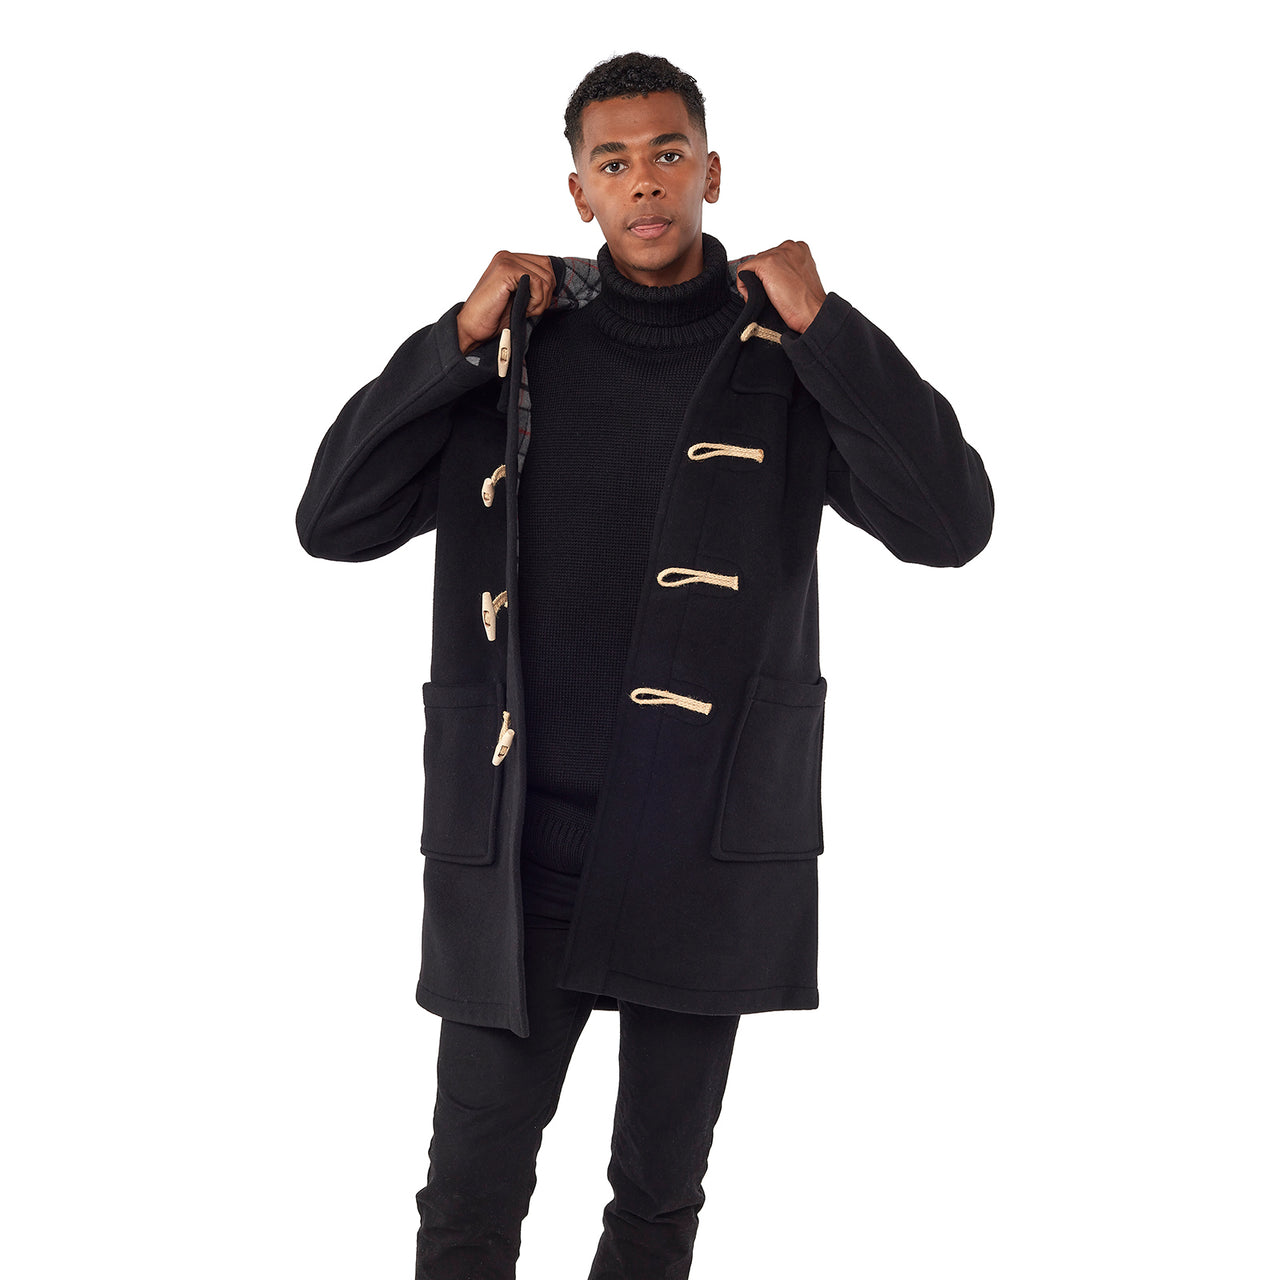 Mens Black Classic Fit Original And Authentic Duffle Coat With Wooden Toggles